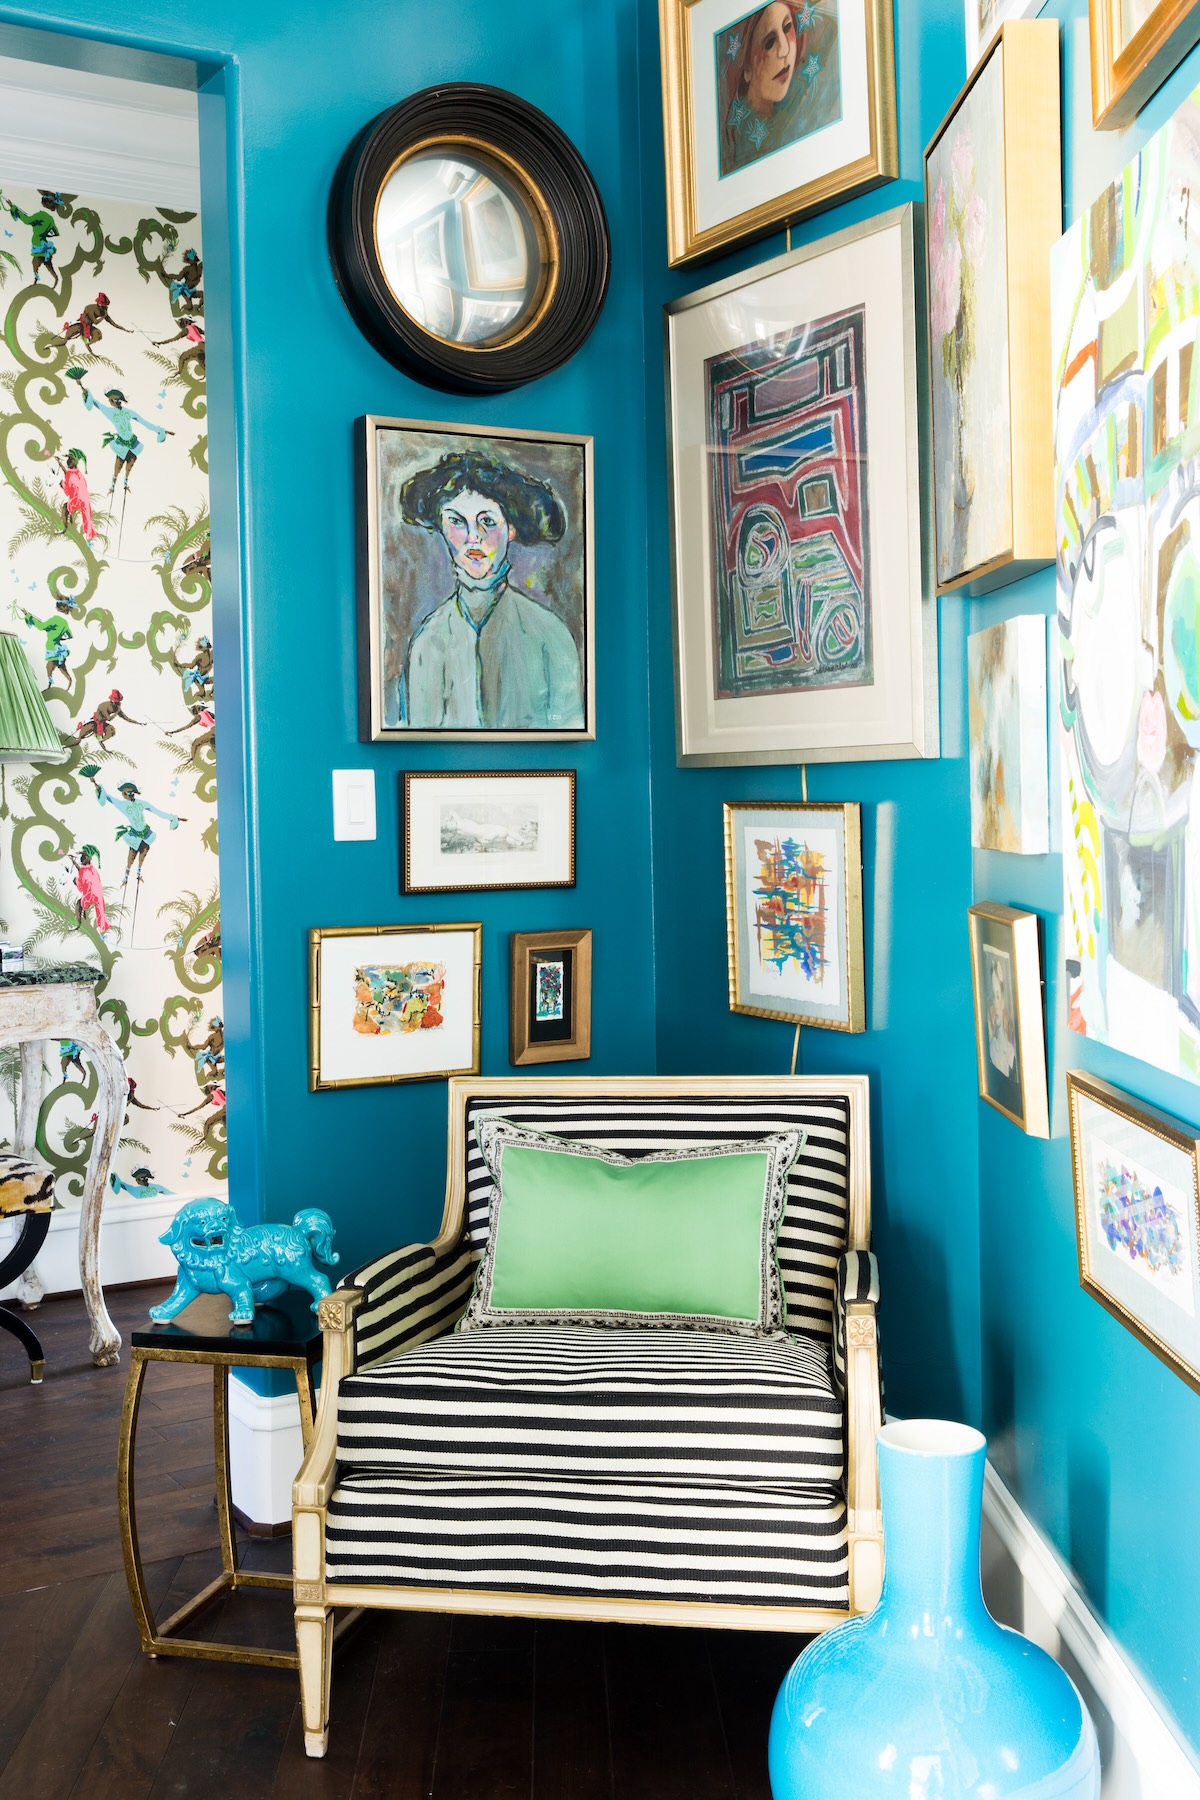 Teal painted room with a striped chair and gallery wall.